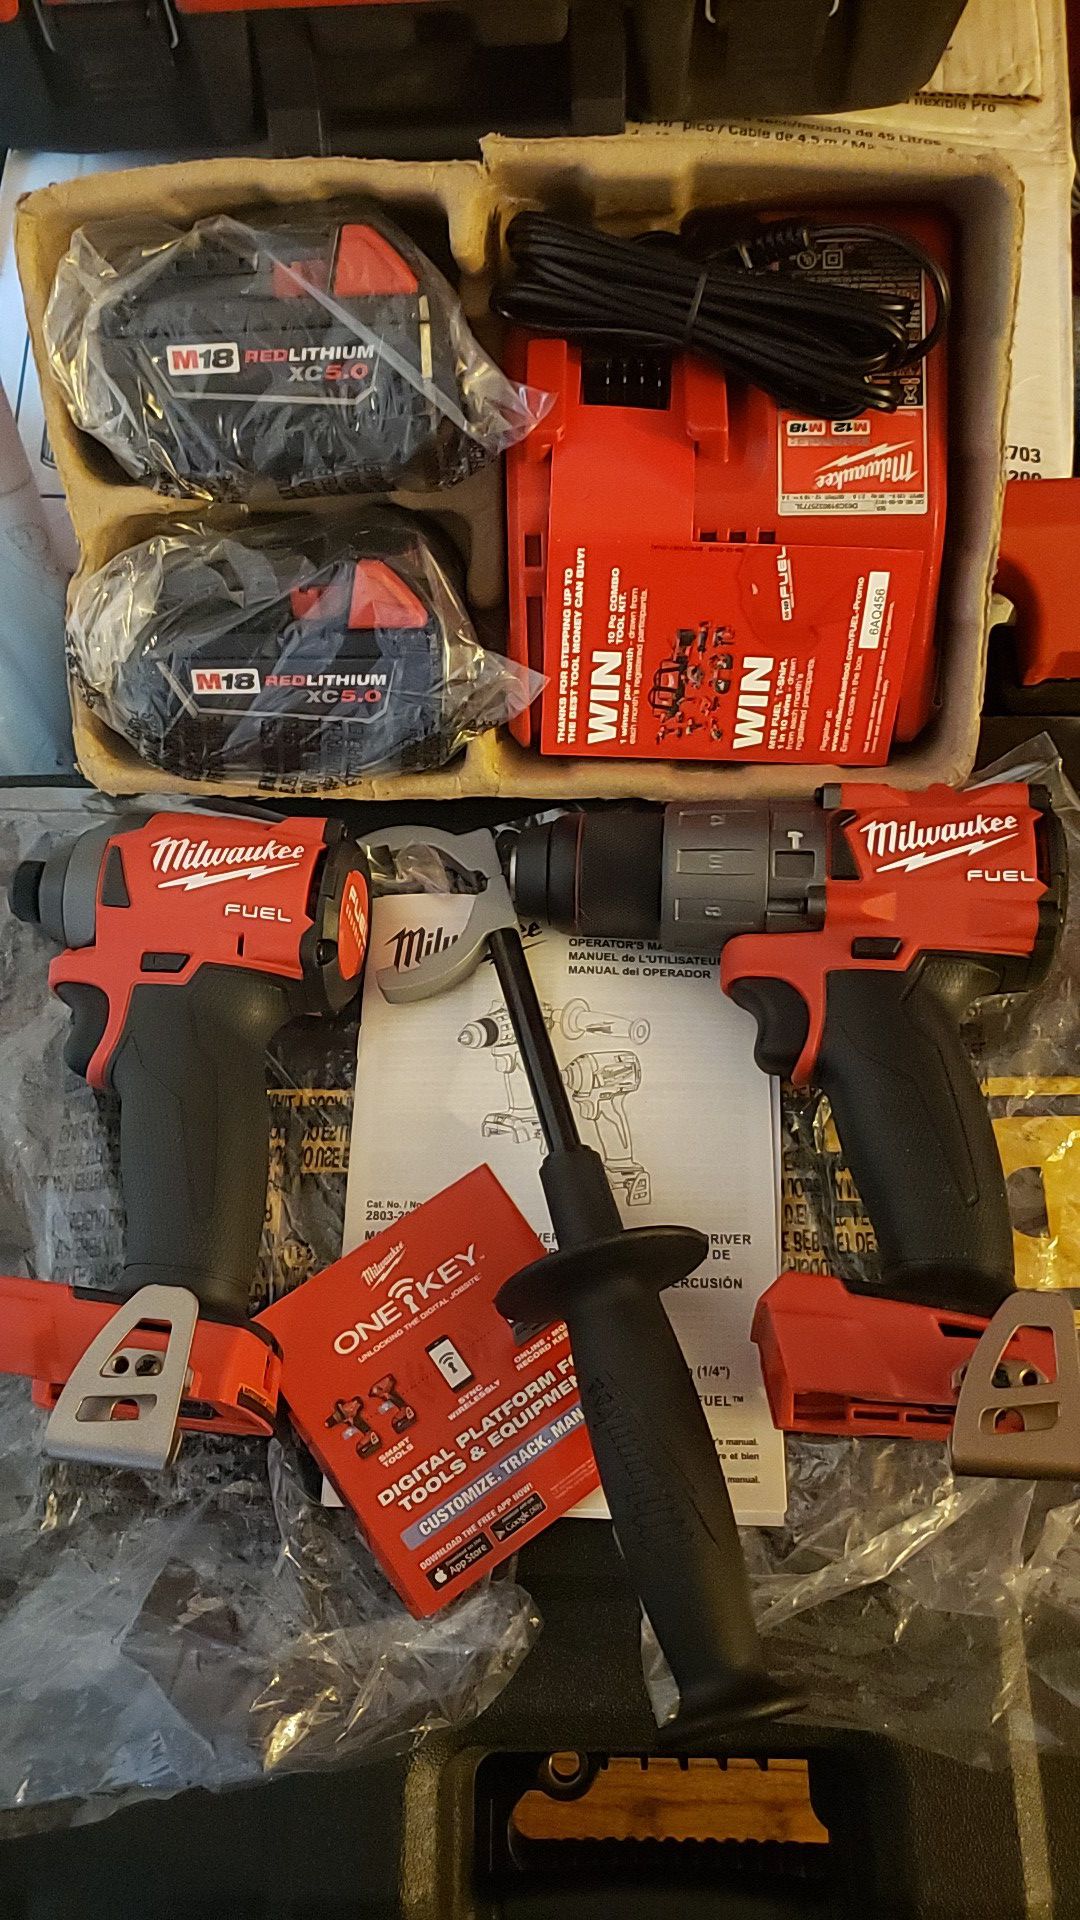 Brand New Milwaukee M18 Fuel . Impact and hammer drill . No box. Brand New charger and batteries.